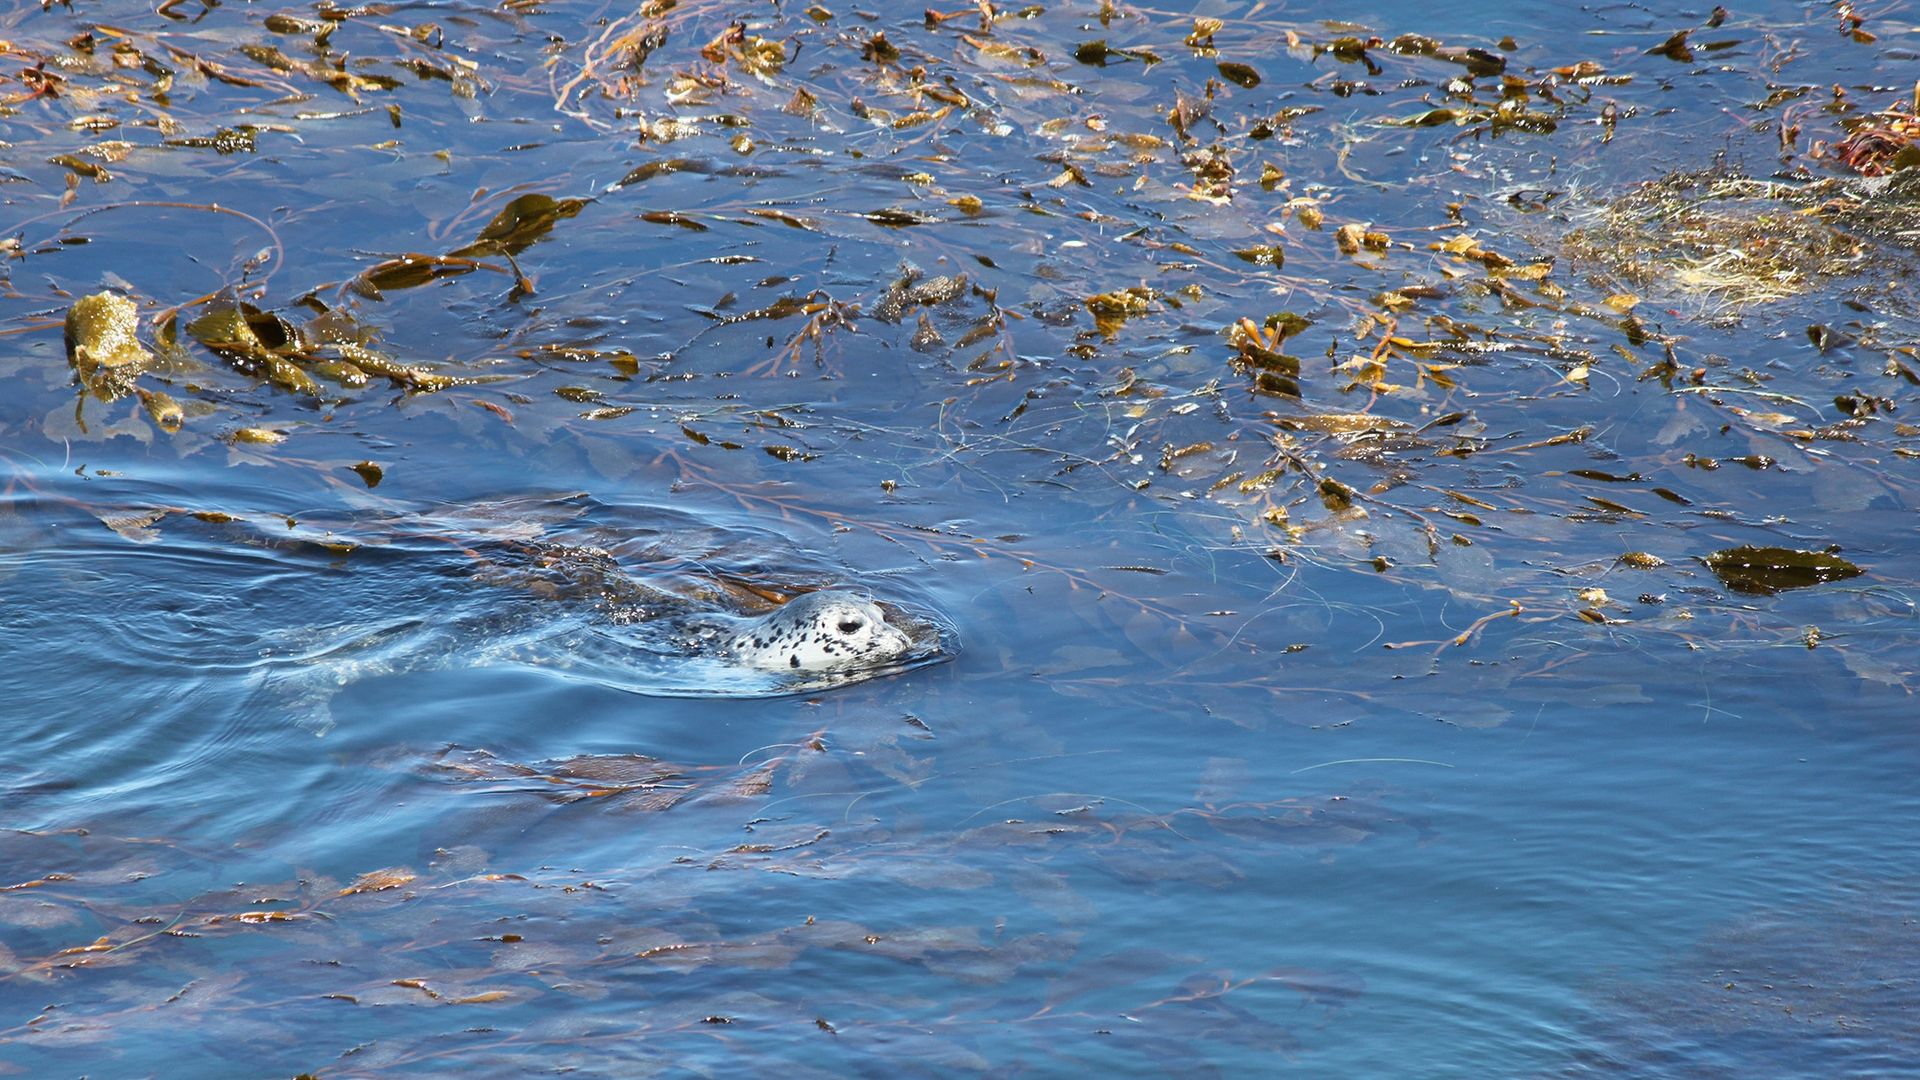 black-spotted head of seal moving through blue waters filled with brown kelp